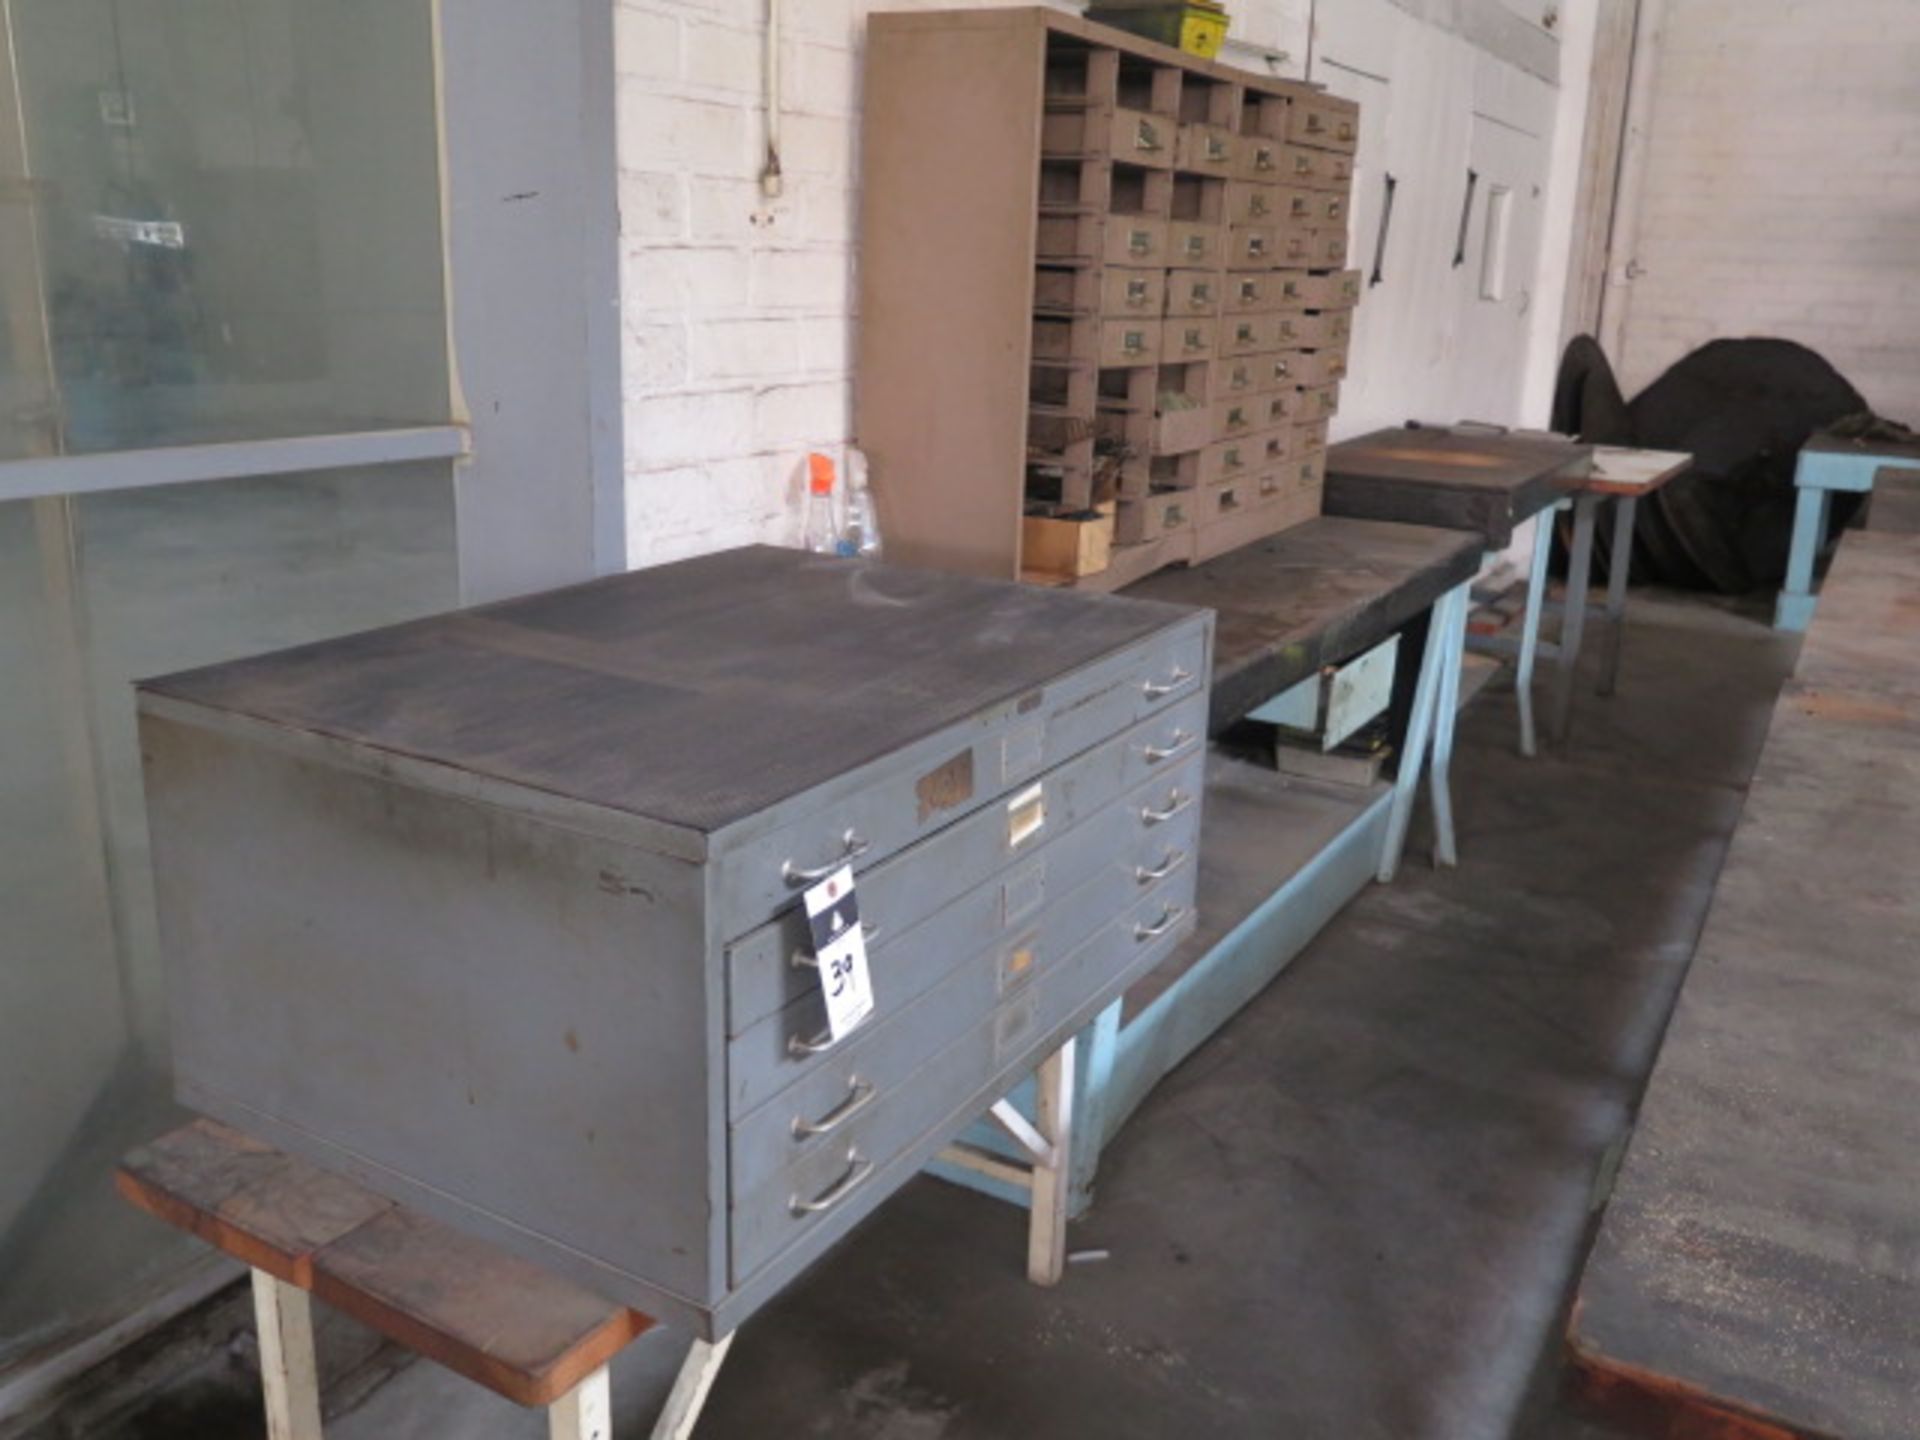 Print Cabinet and Work Benches (3)